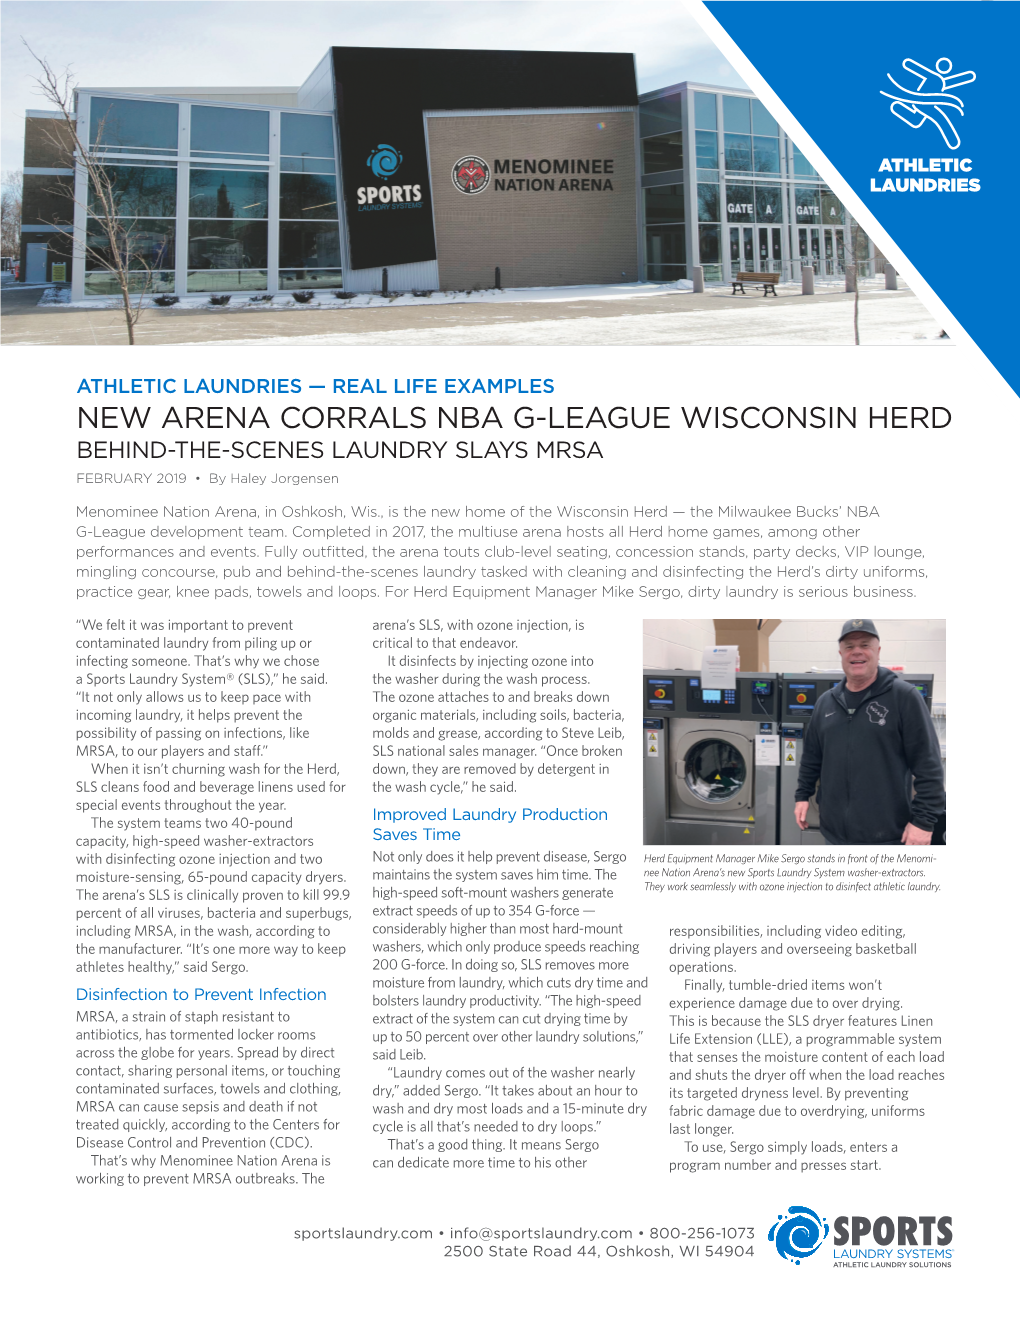 NEW ARENA CORRALS NBA G-LEAGUE WISCONSIN HERD BEHIND-THE-SCENES LAUNDRY SLAYS MRSA FEBRUARY 2019 • by Haley Jorgensen